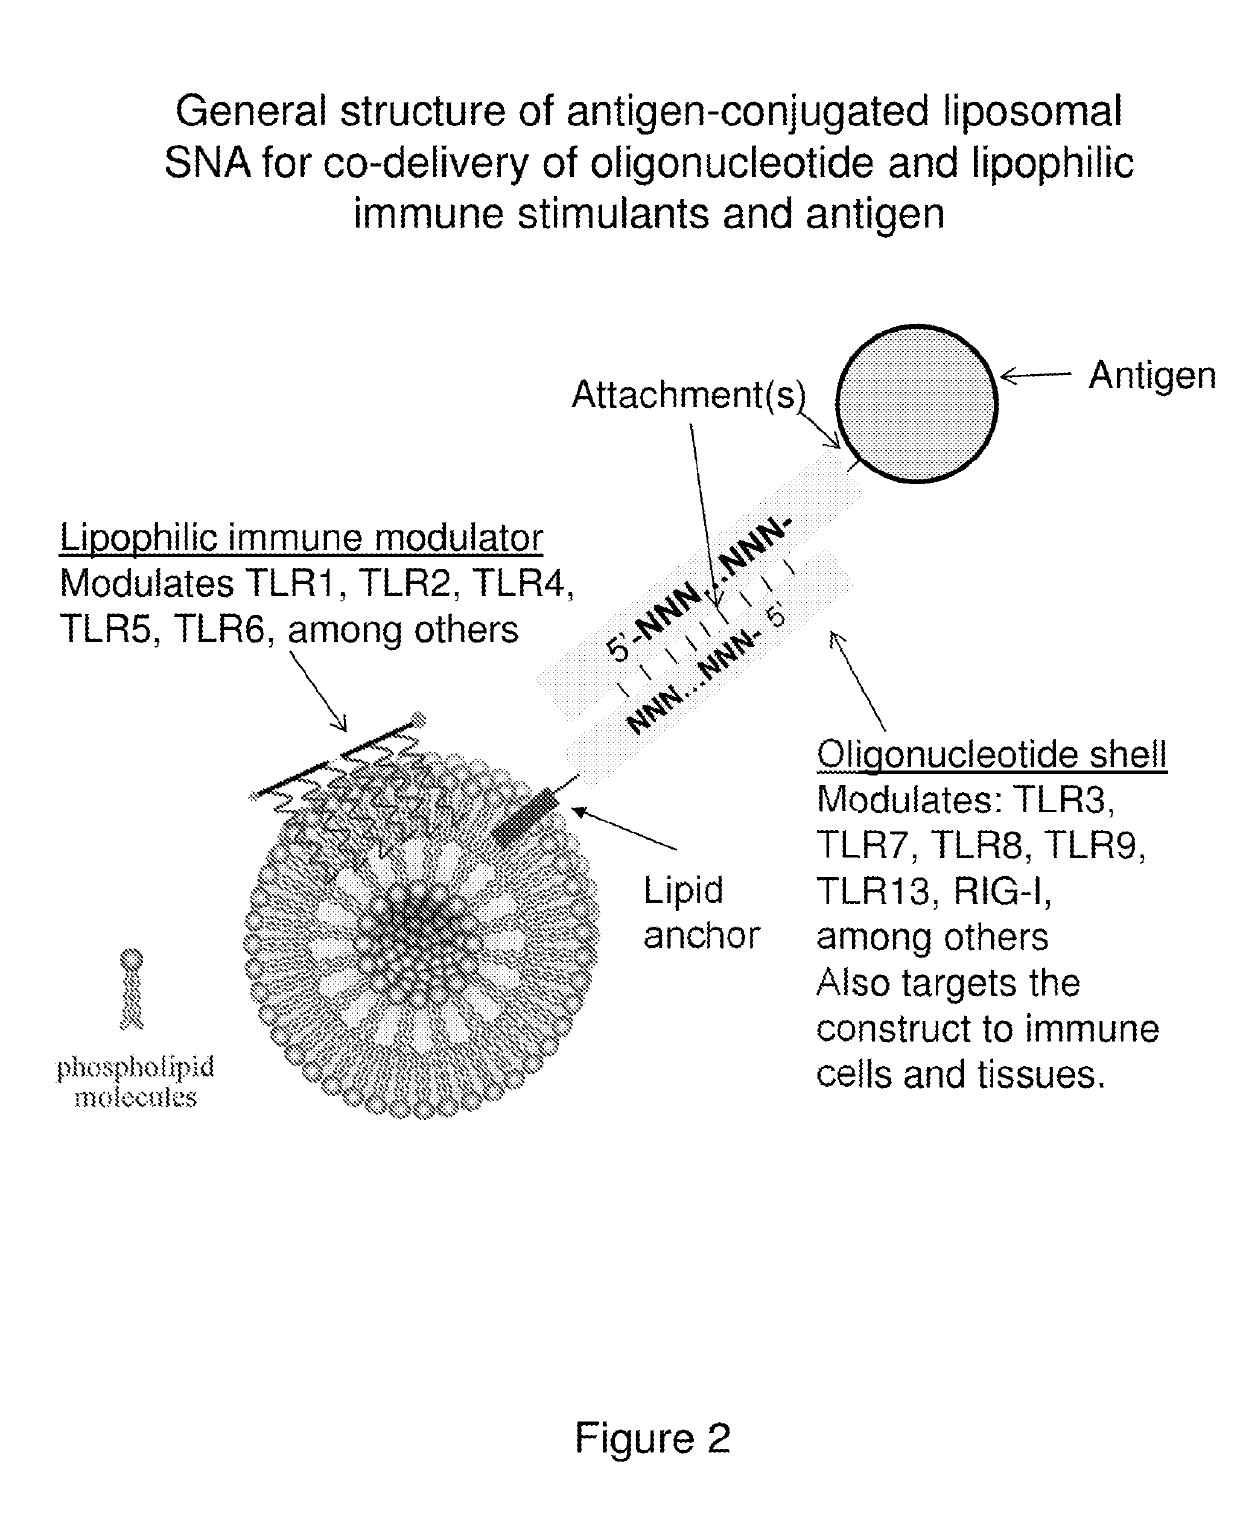 Multivalent delivery of immune modulators by liposomal spherical nucleic acids for prophylactic or therapeutic applications